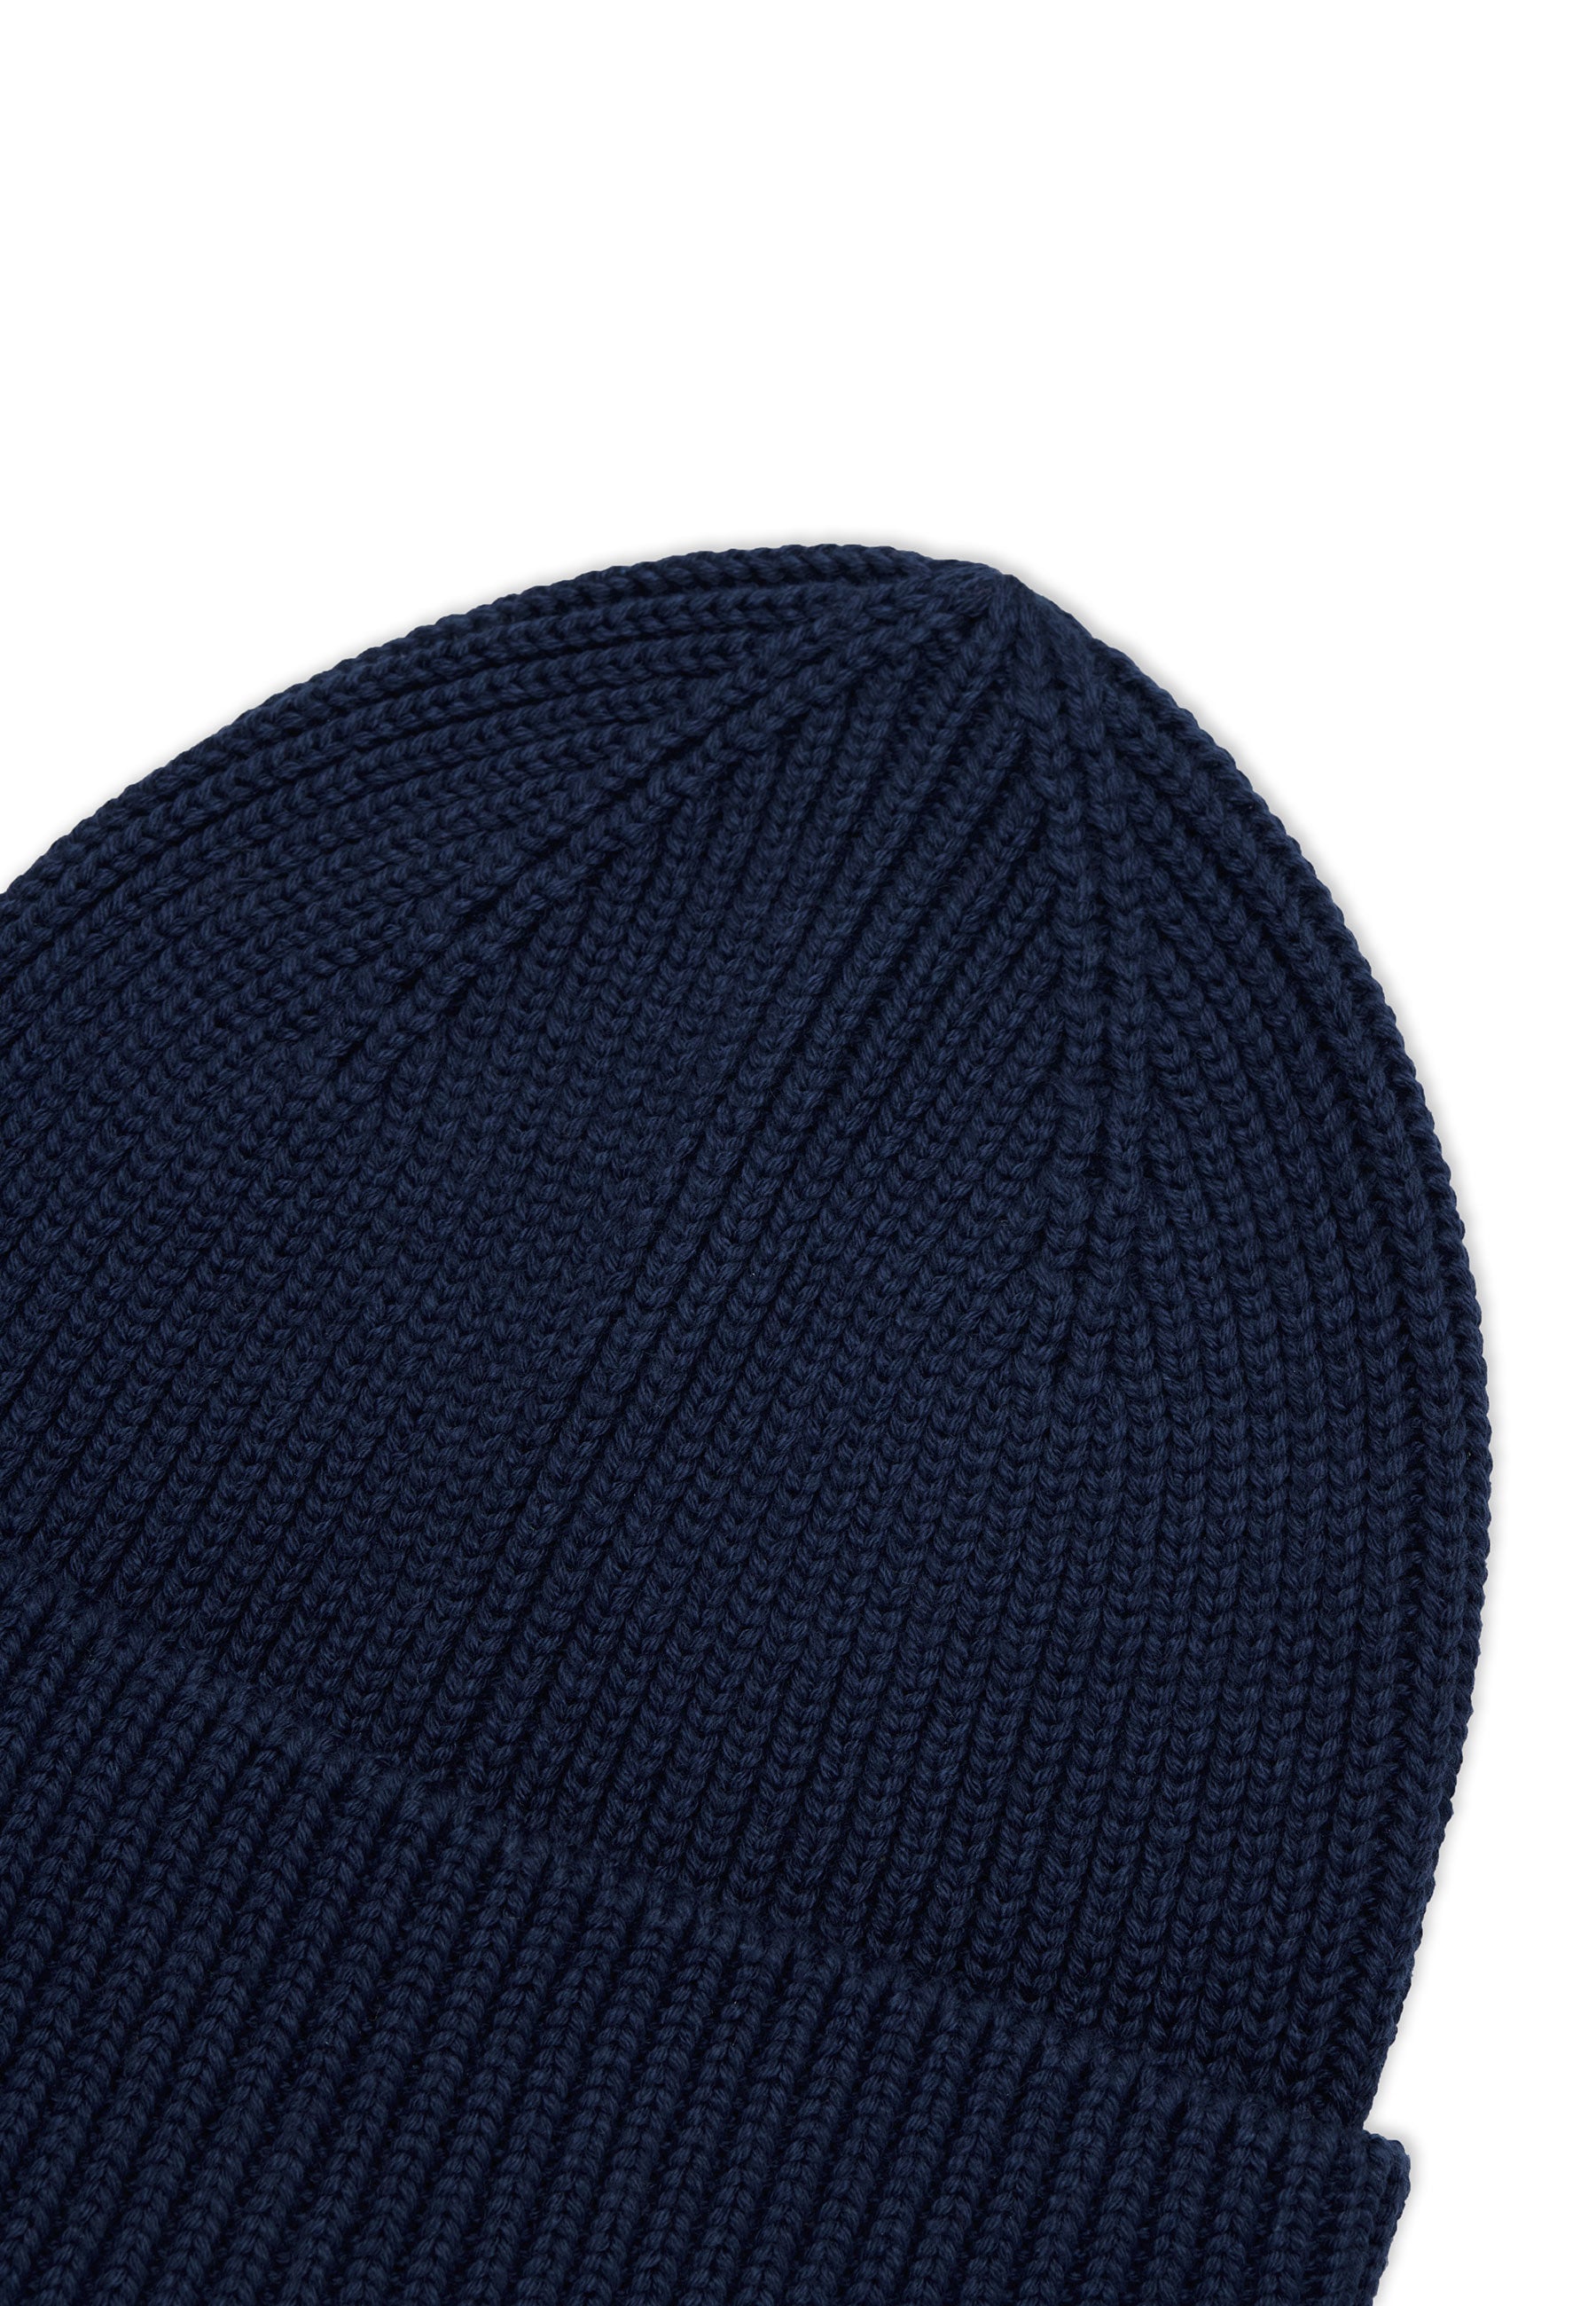 WMHENRY BEANIE in Navy